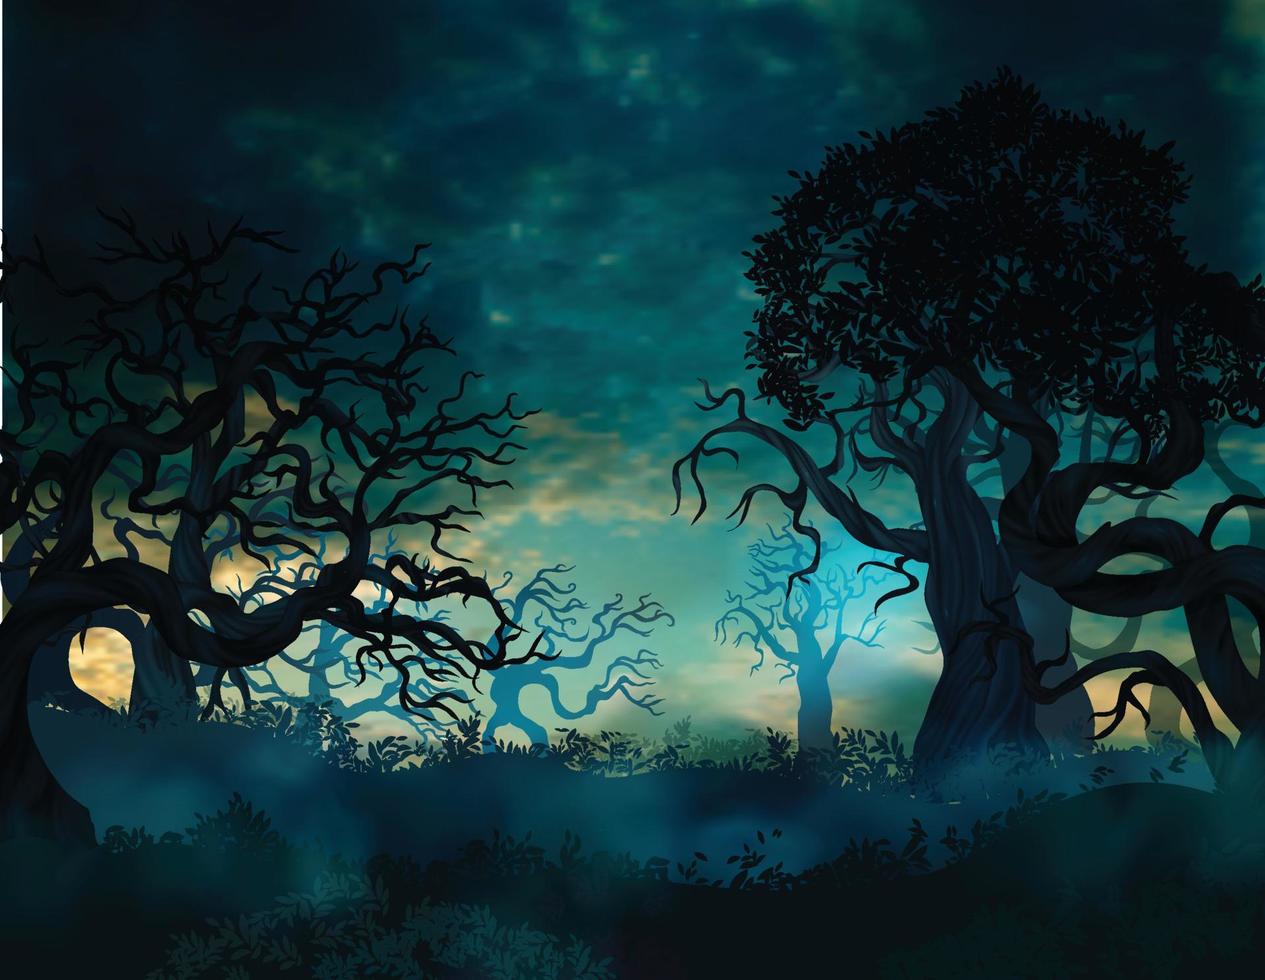 Spooky woods at night on Halloween vector